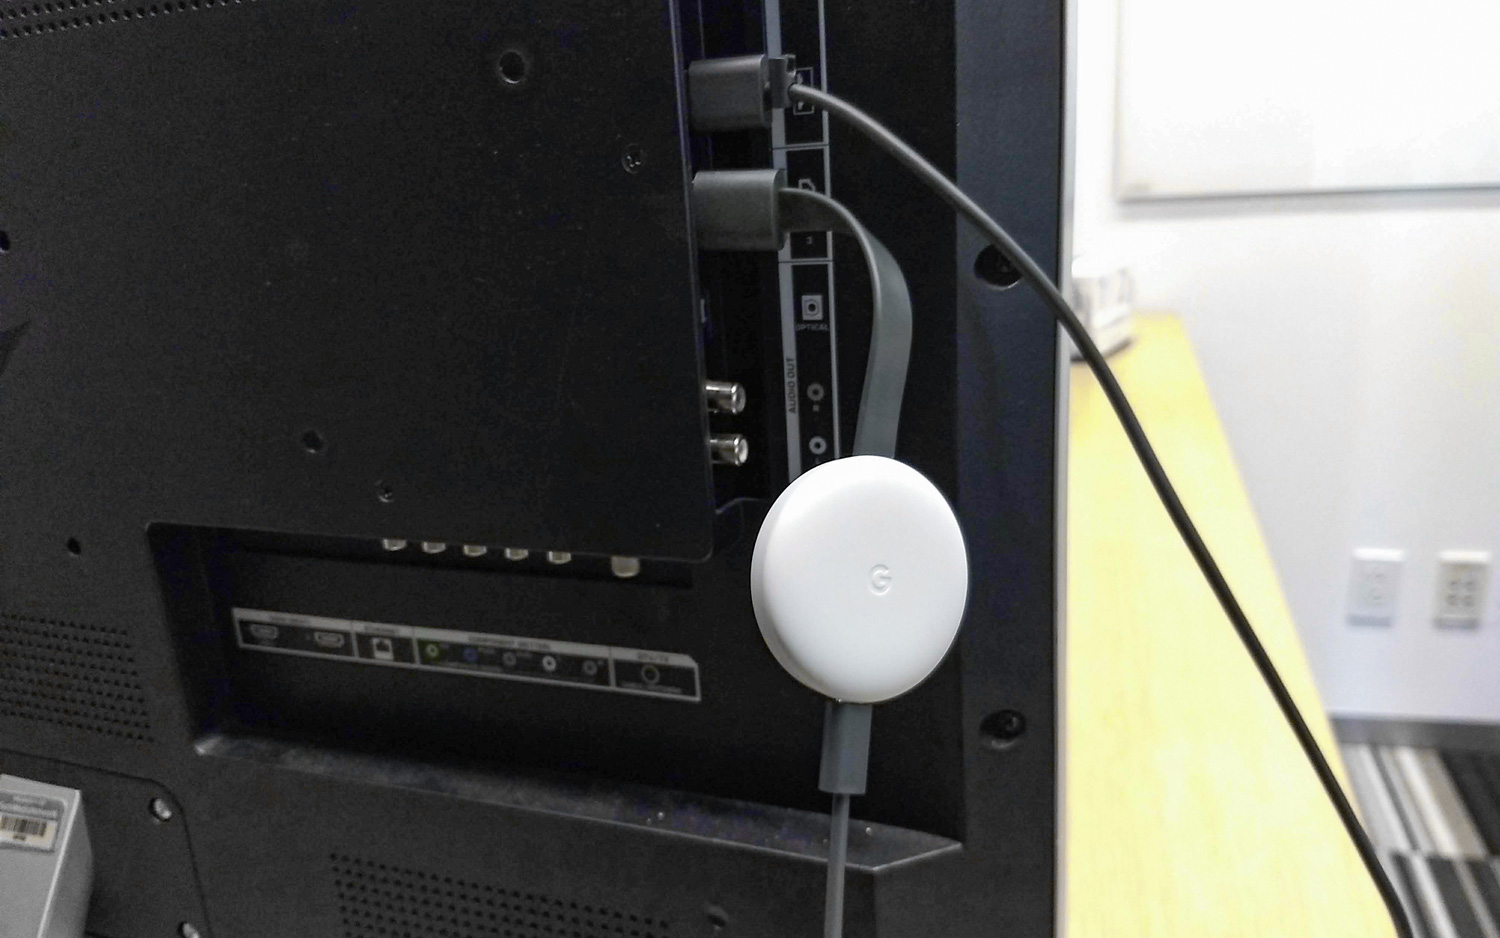 Google Chromecast is behind the screen